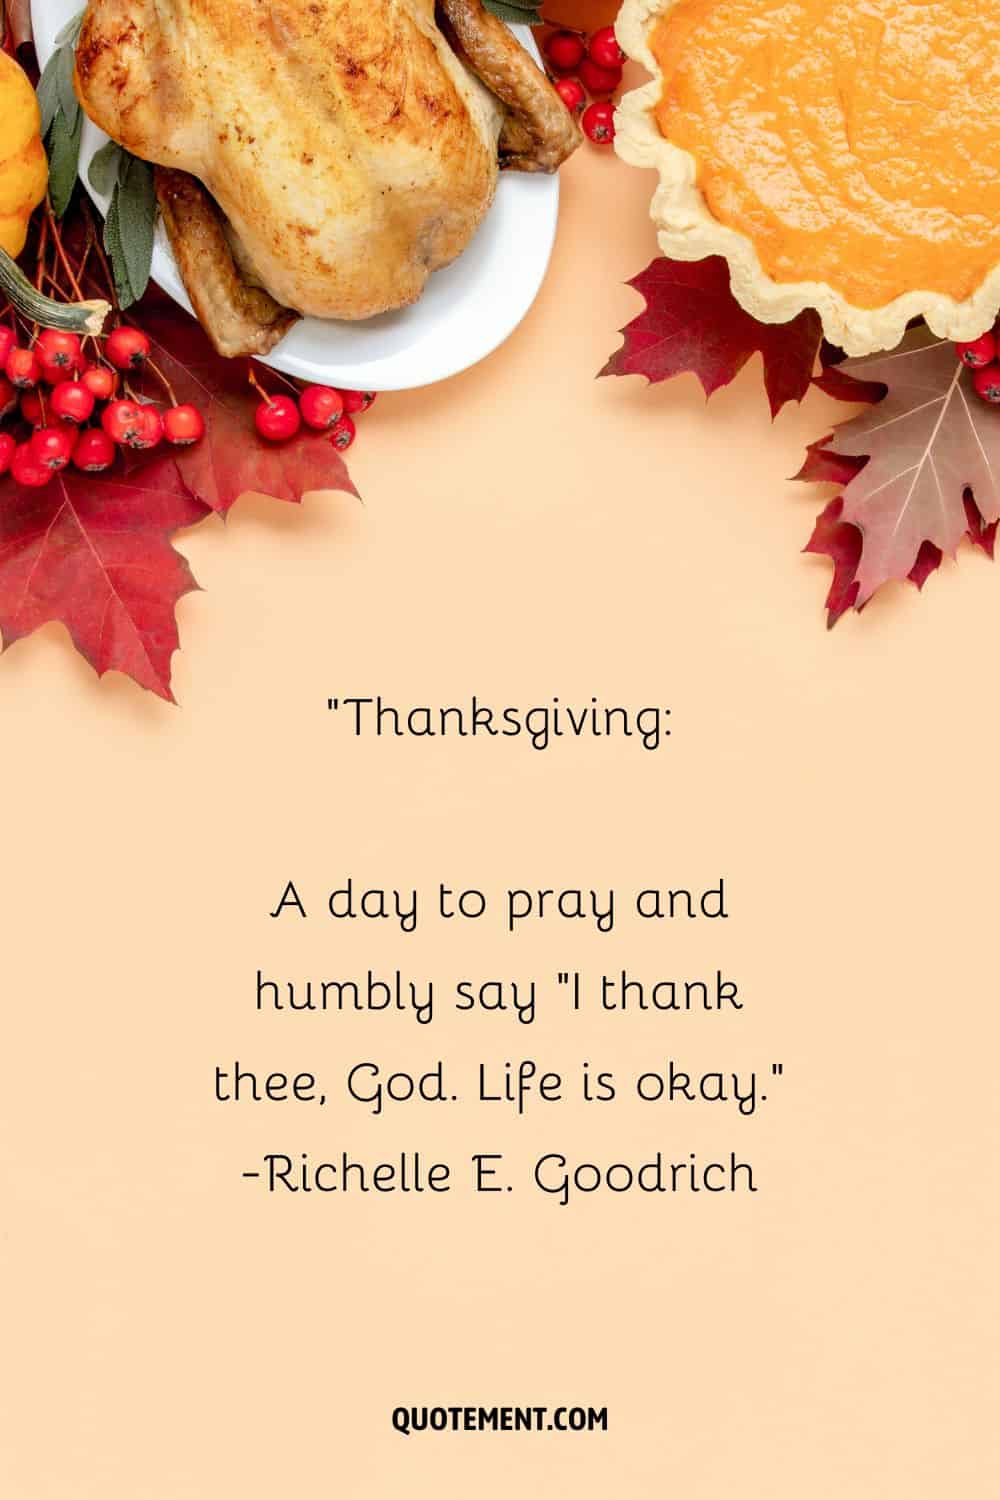 turkey, pie, and autumn decorations for Thanksgiving representing the best giving thanks quote